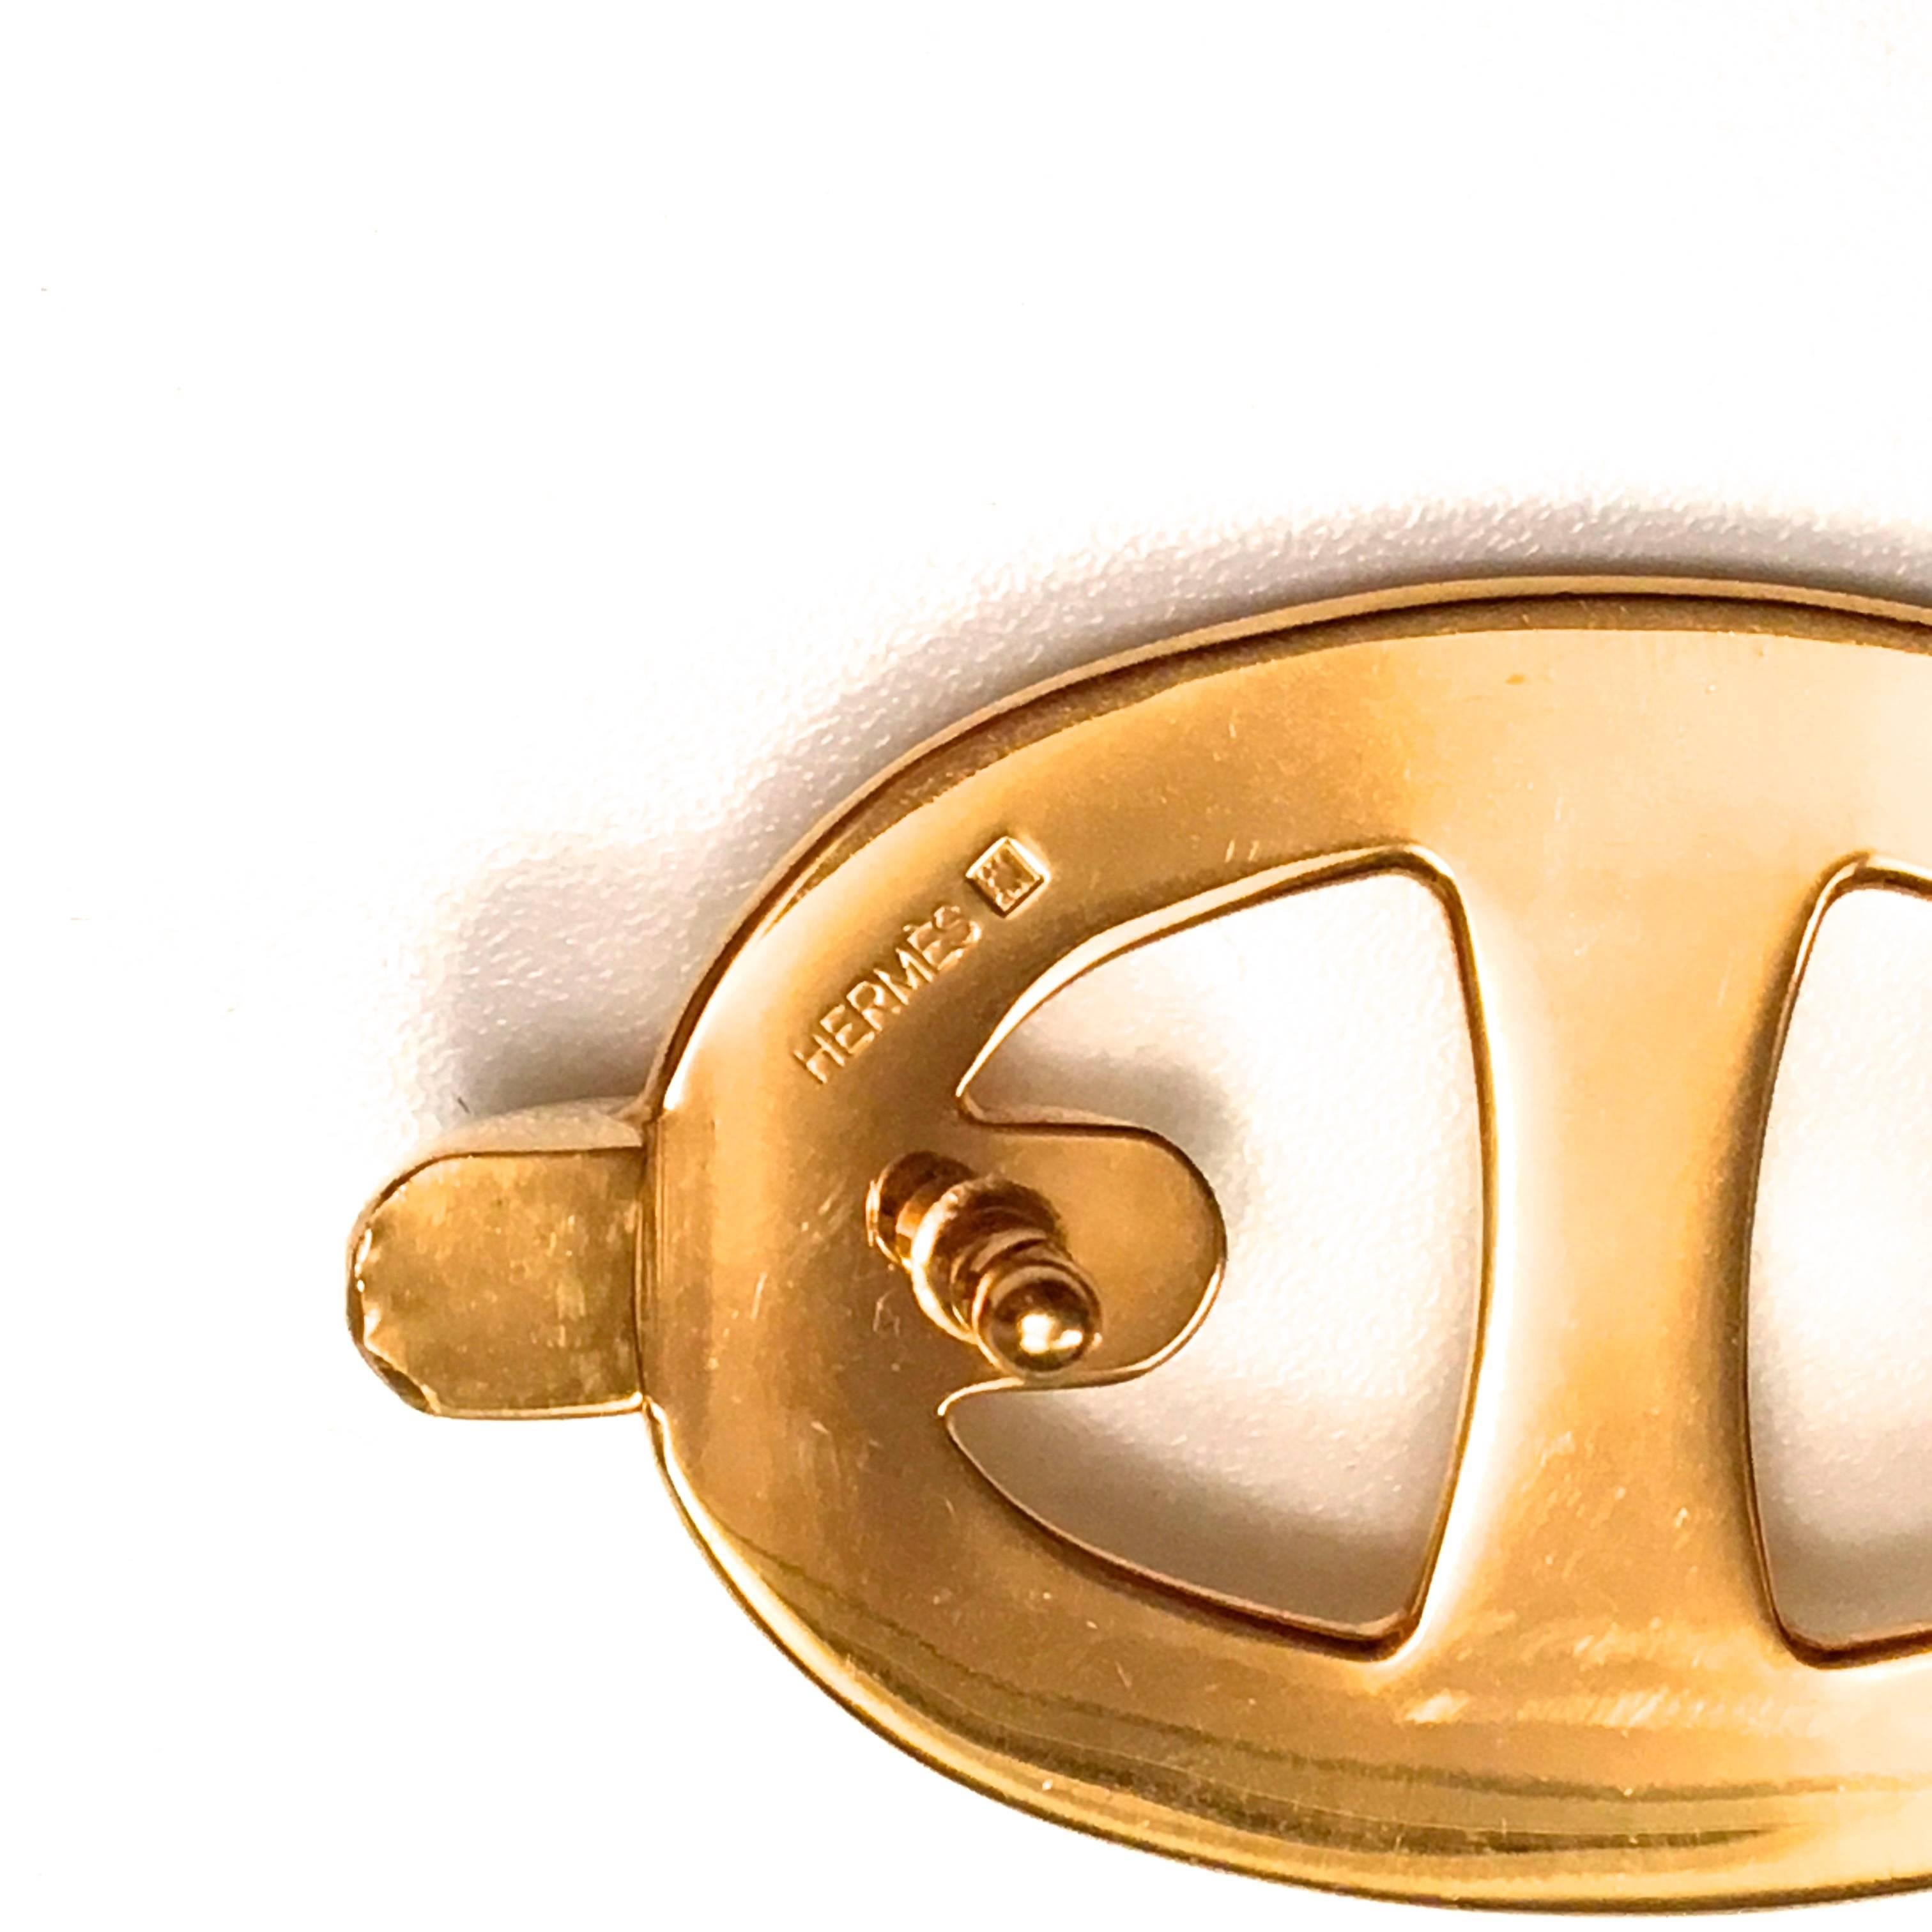 Presented here is a gold tone buckle from Hermes. This beautiful vintage buckle is a vintage design that fits any standard Hermes belt. The buckle has been re-plated and is in near mint condition as if it was newly cast. The buckle measures 3 inches